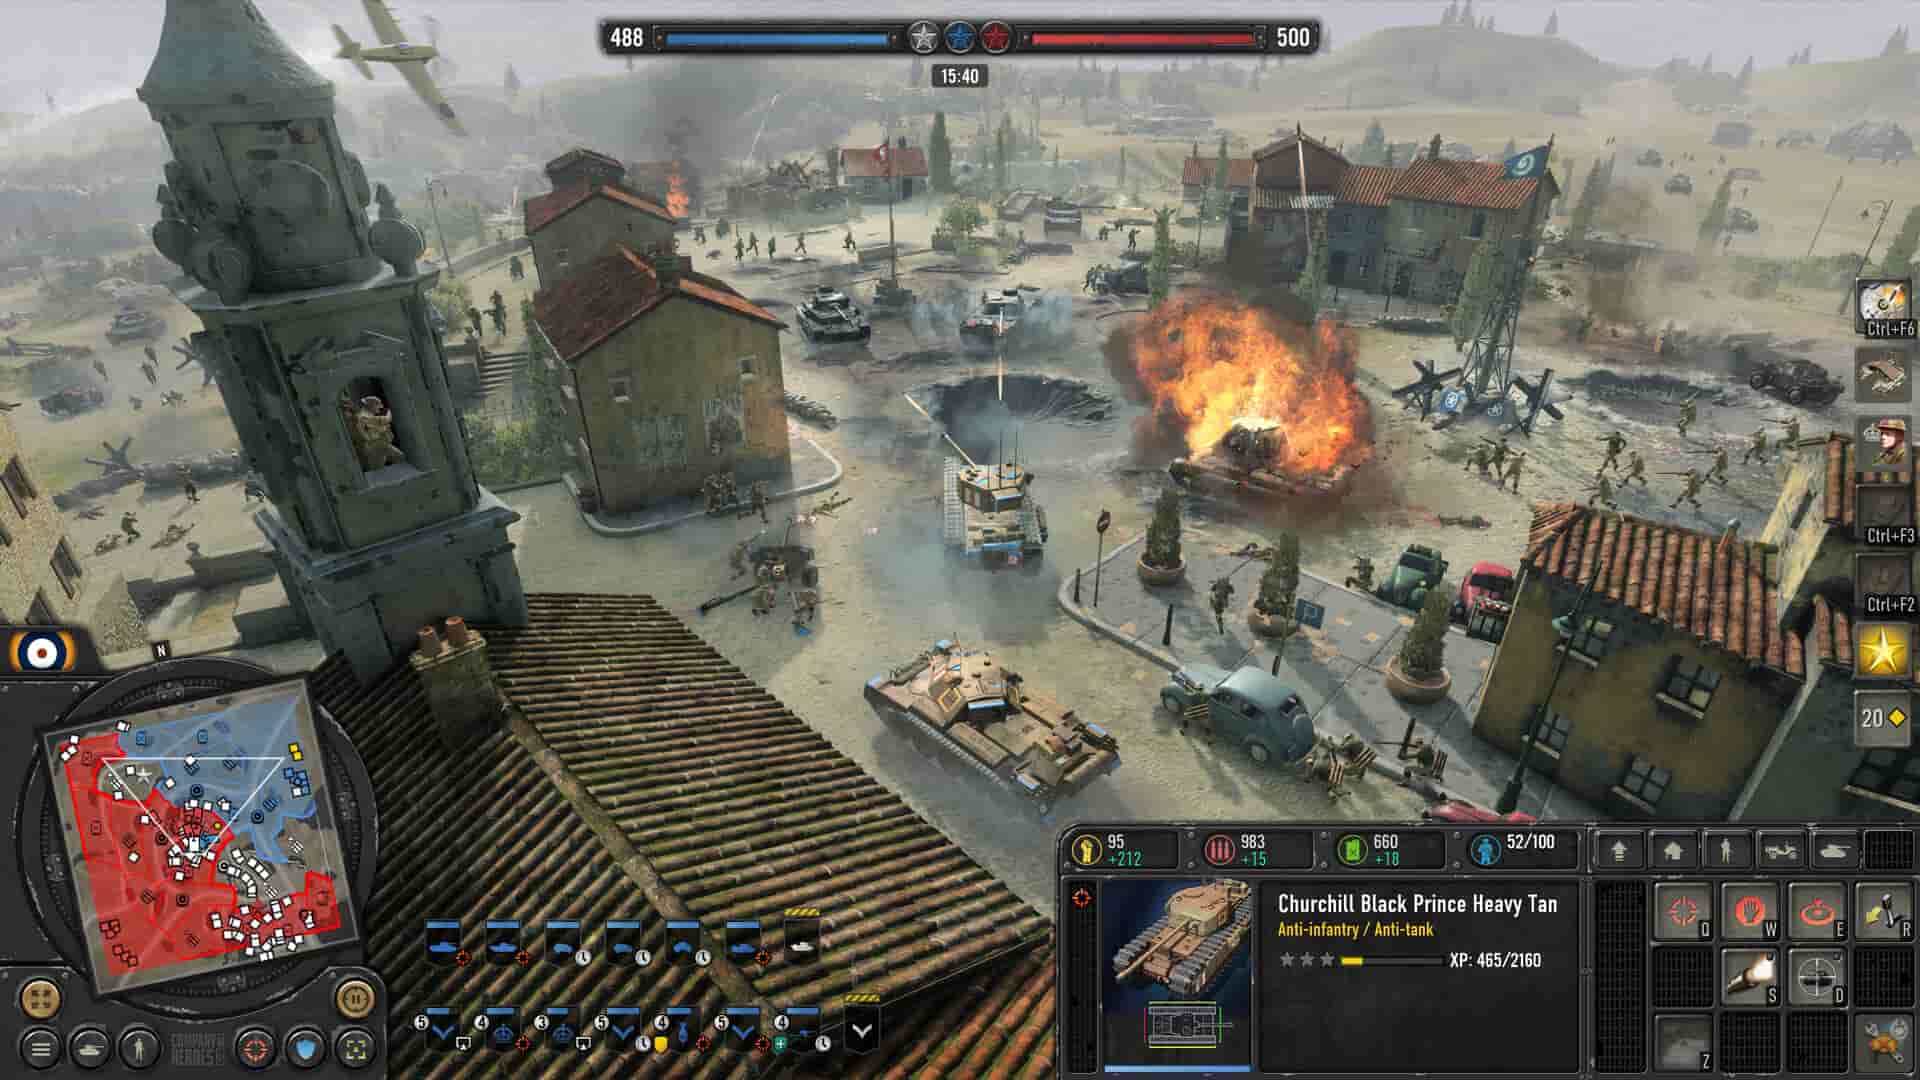 Company of Heroes 4 Release Date: When it will be available